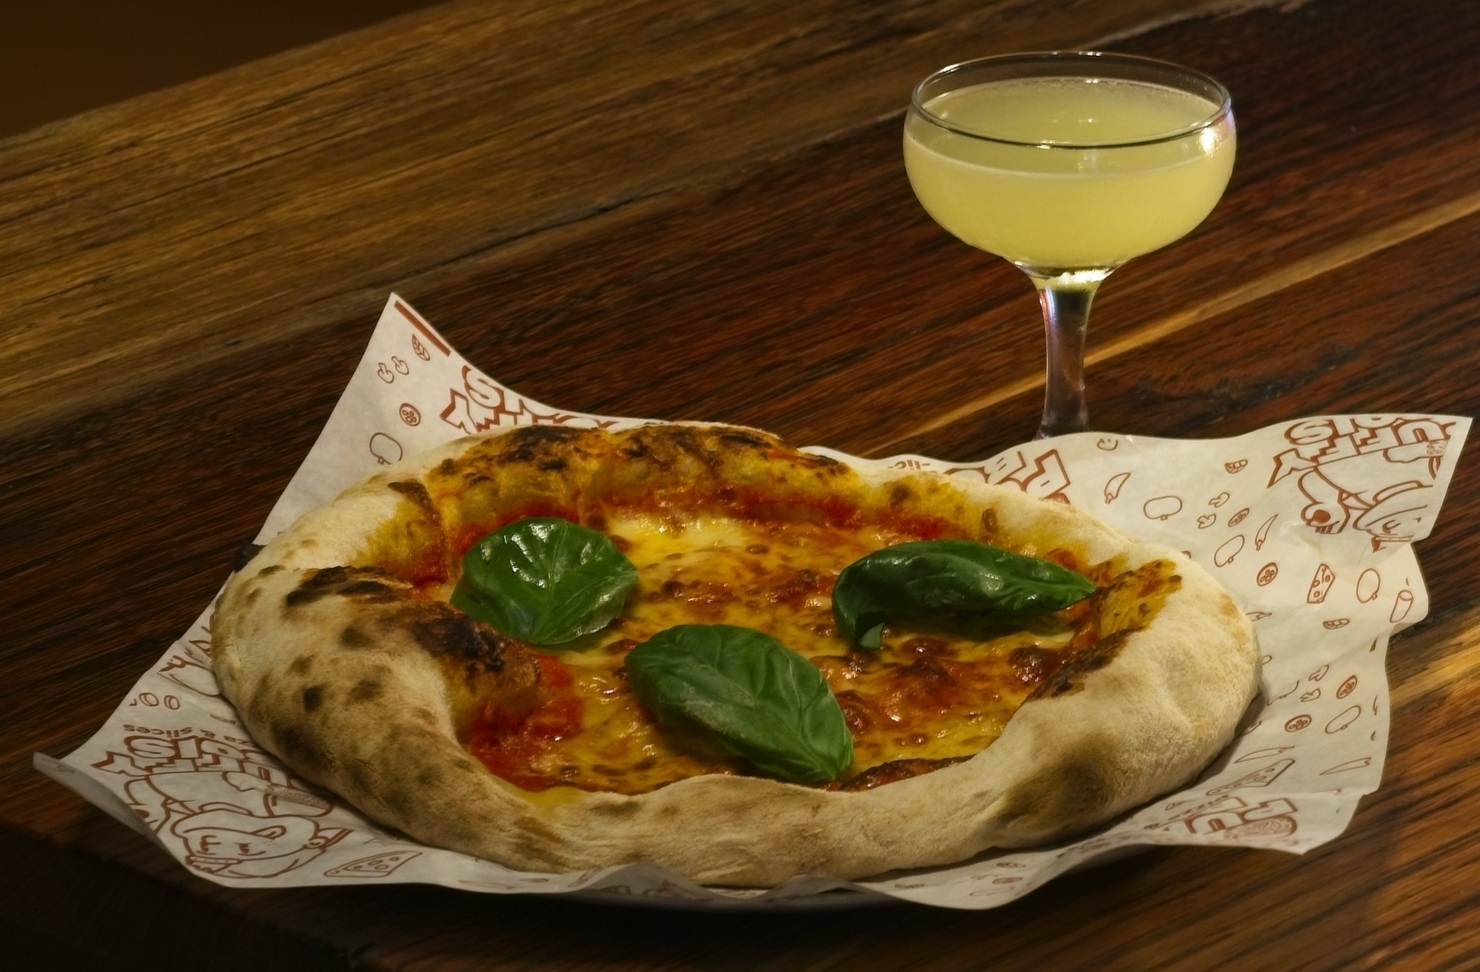 A pizza and cocktail from Puffy Bois